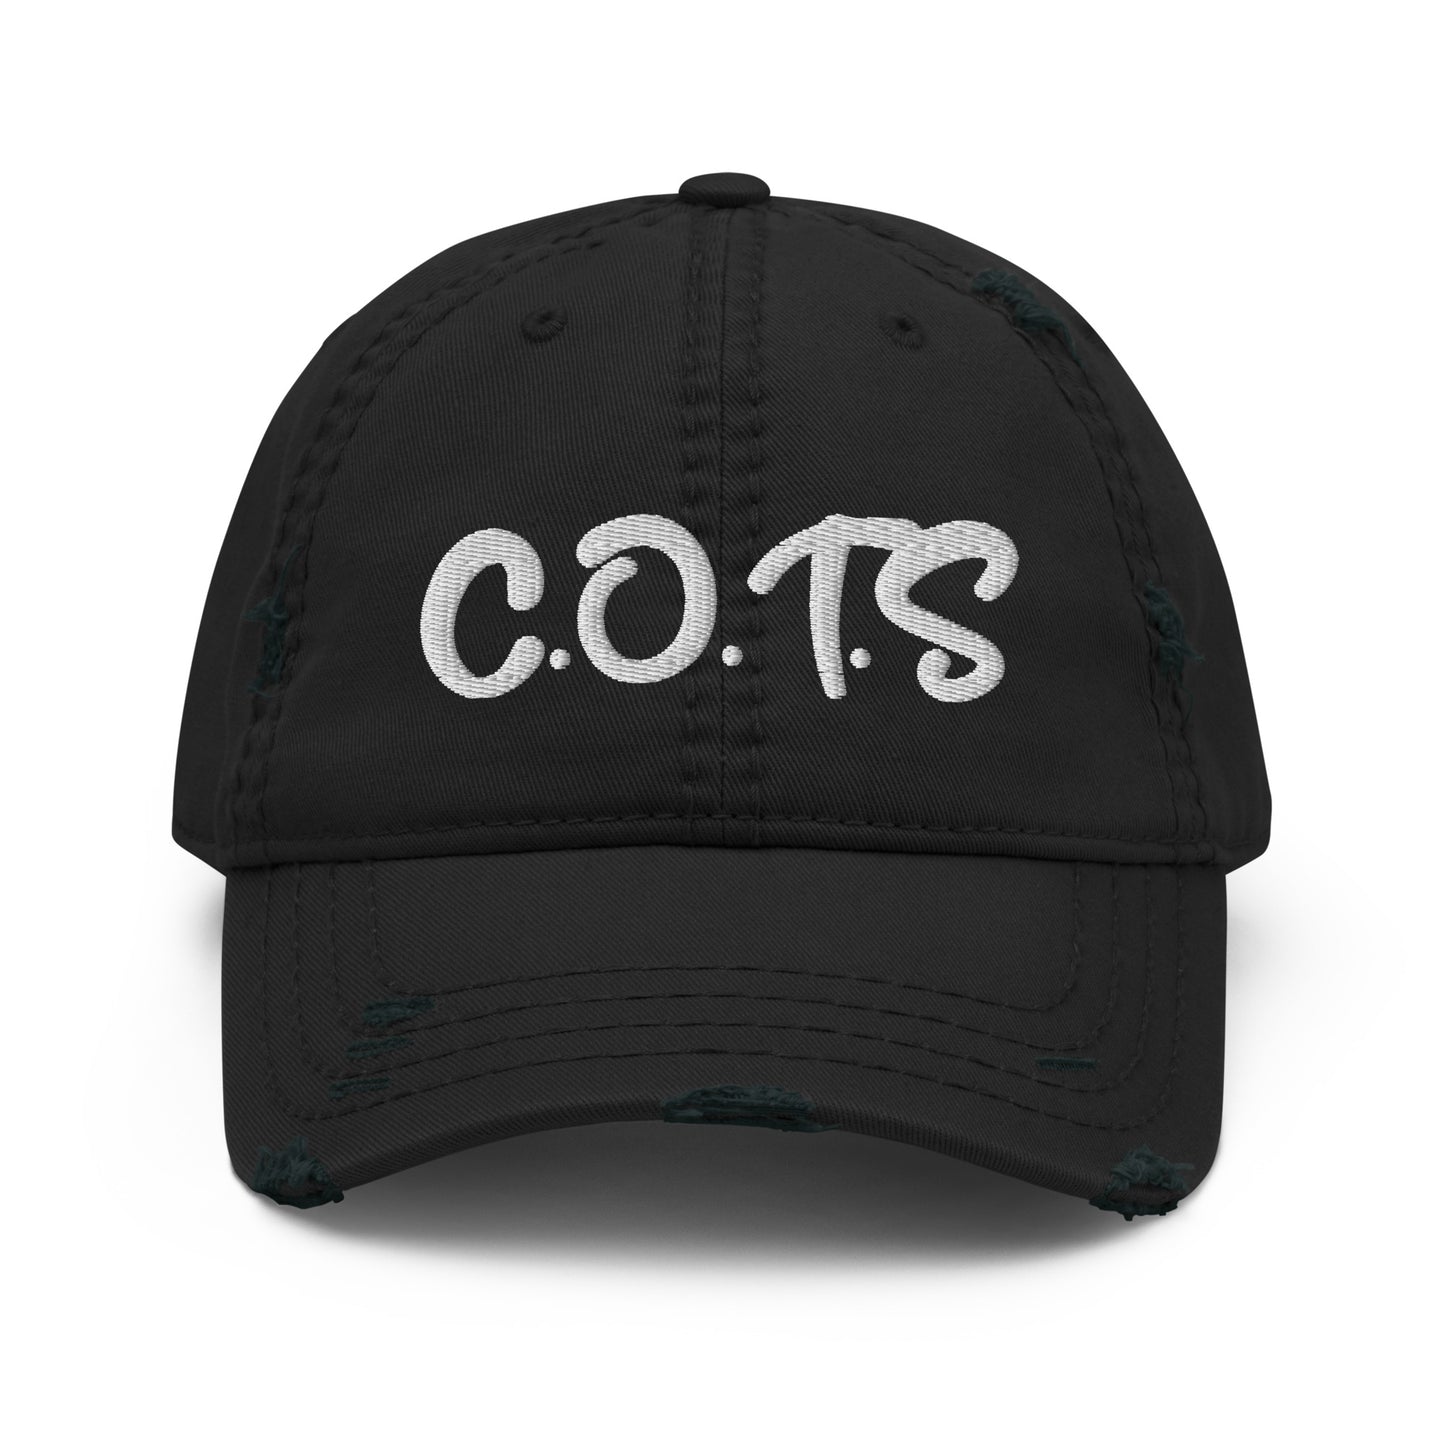 C.O.T.S Distressed Dad Hat